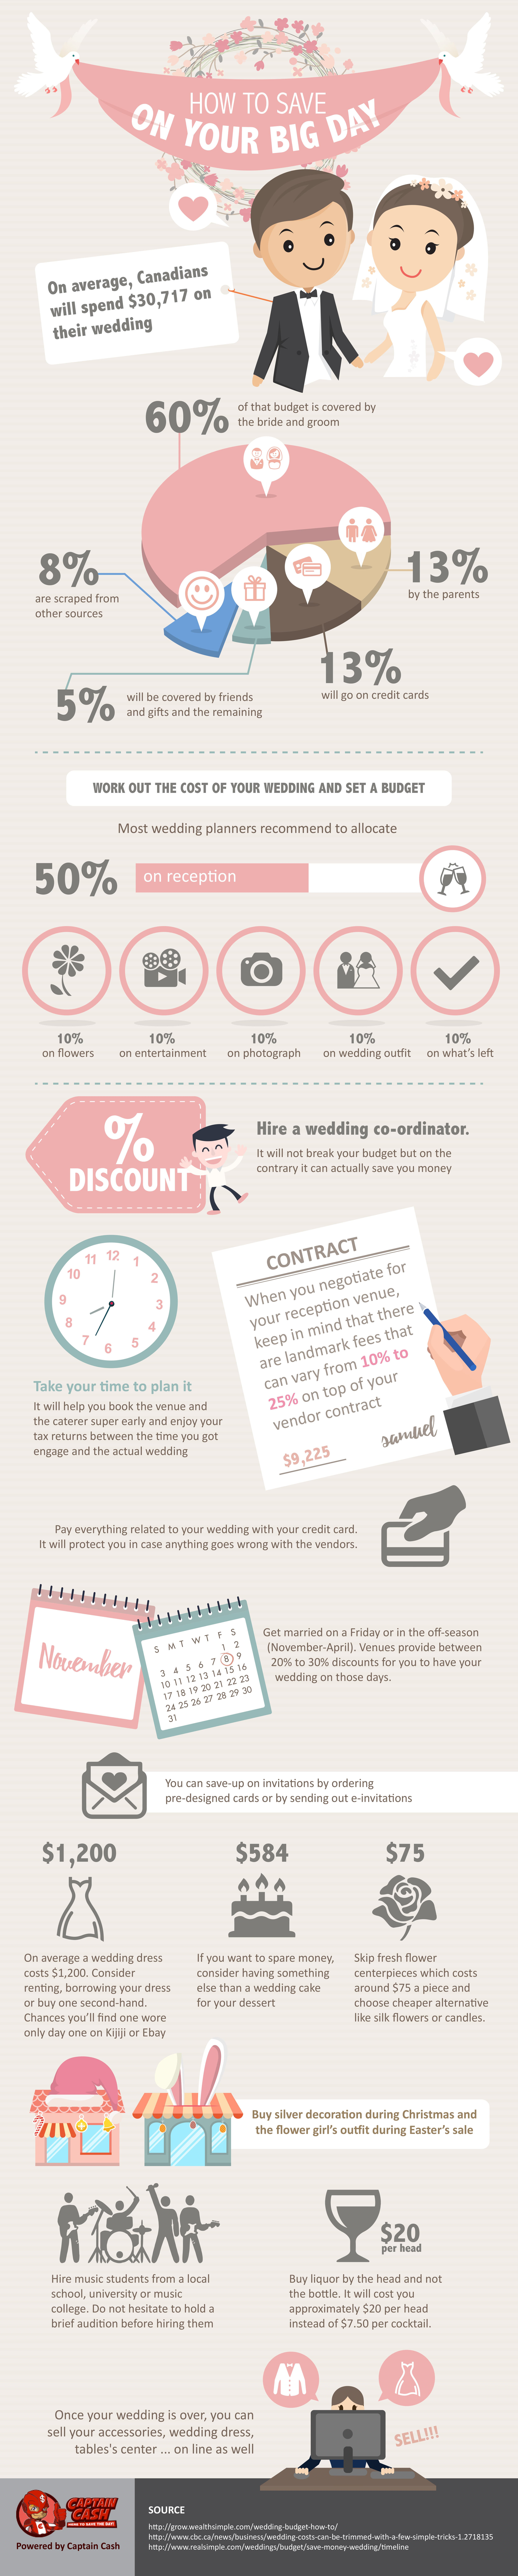 how to save on your big day